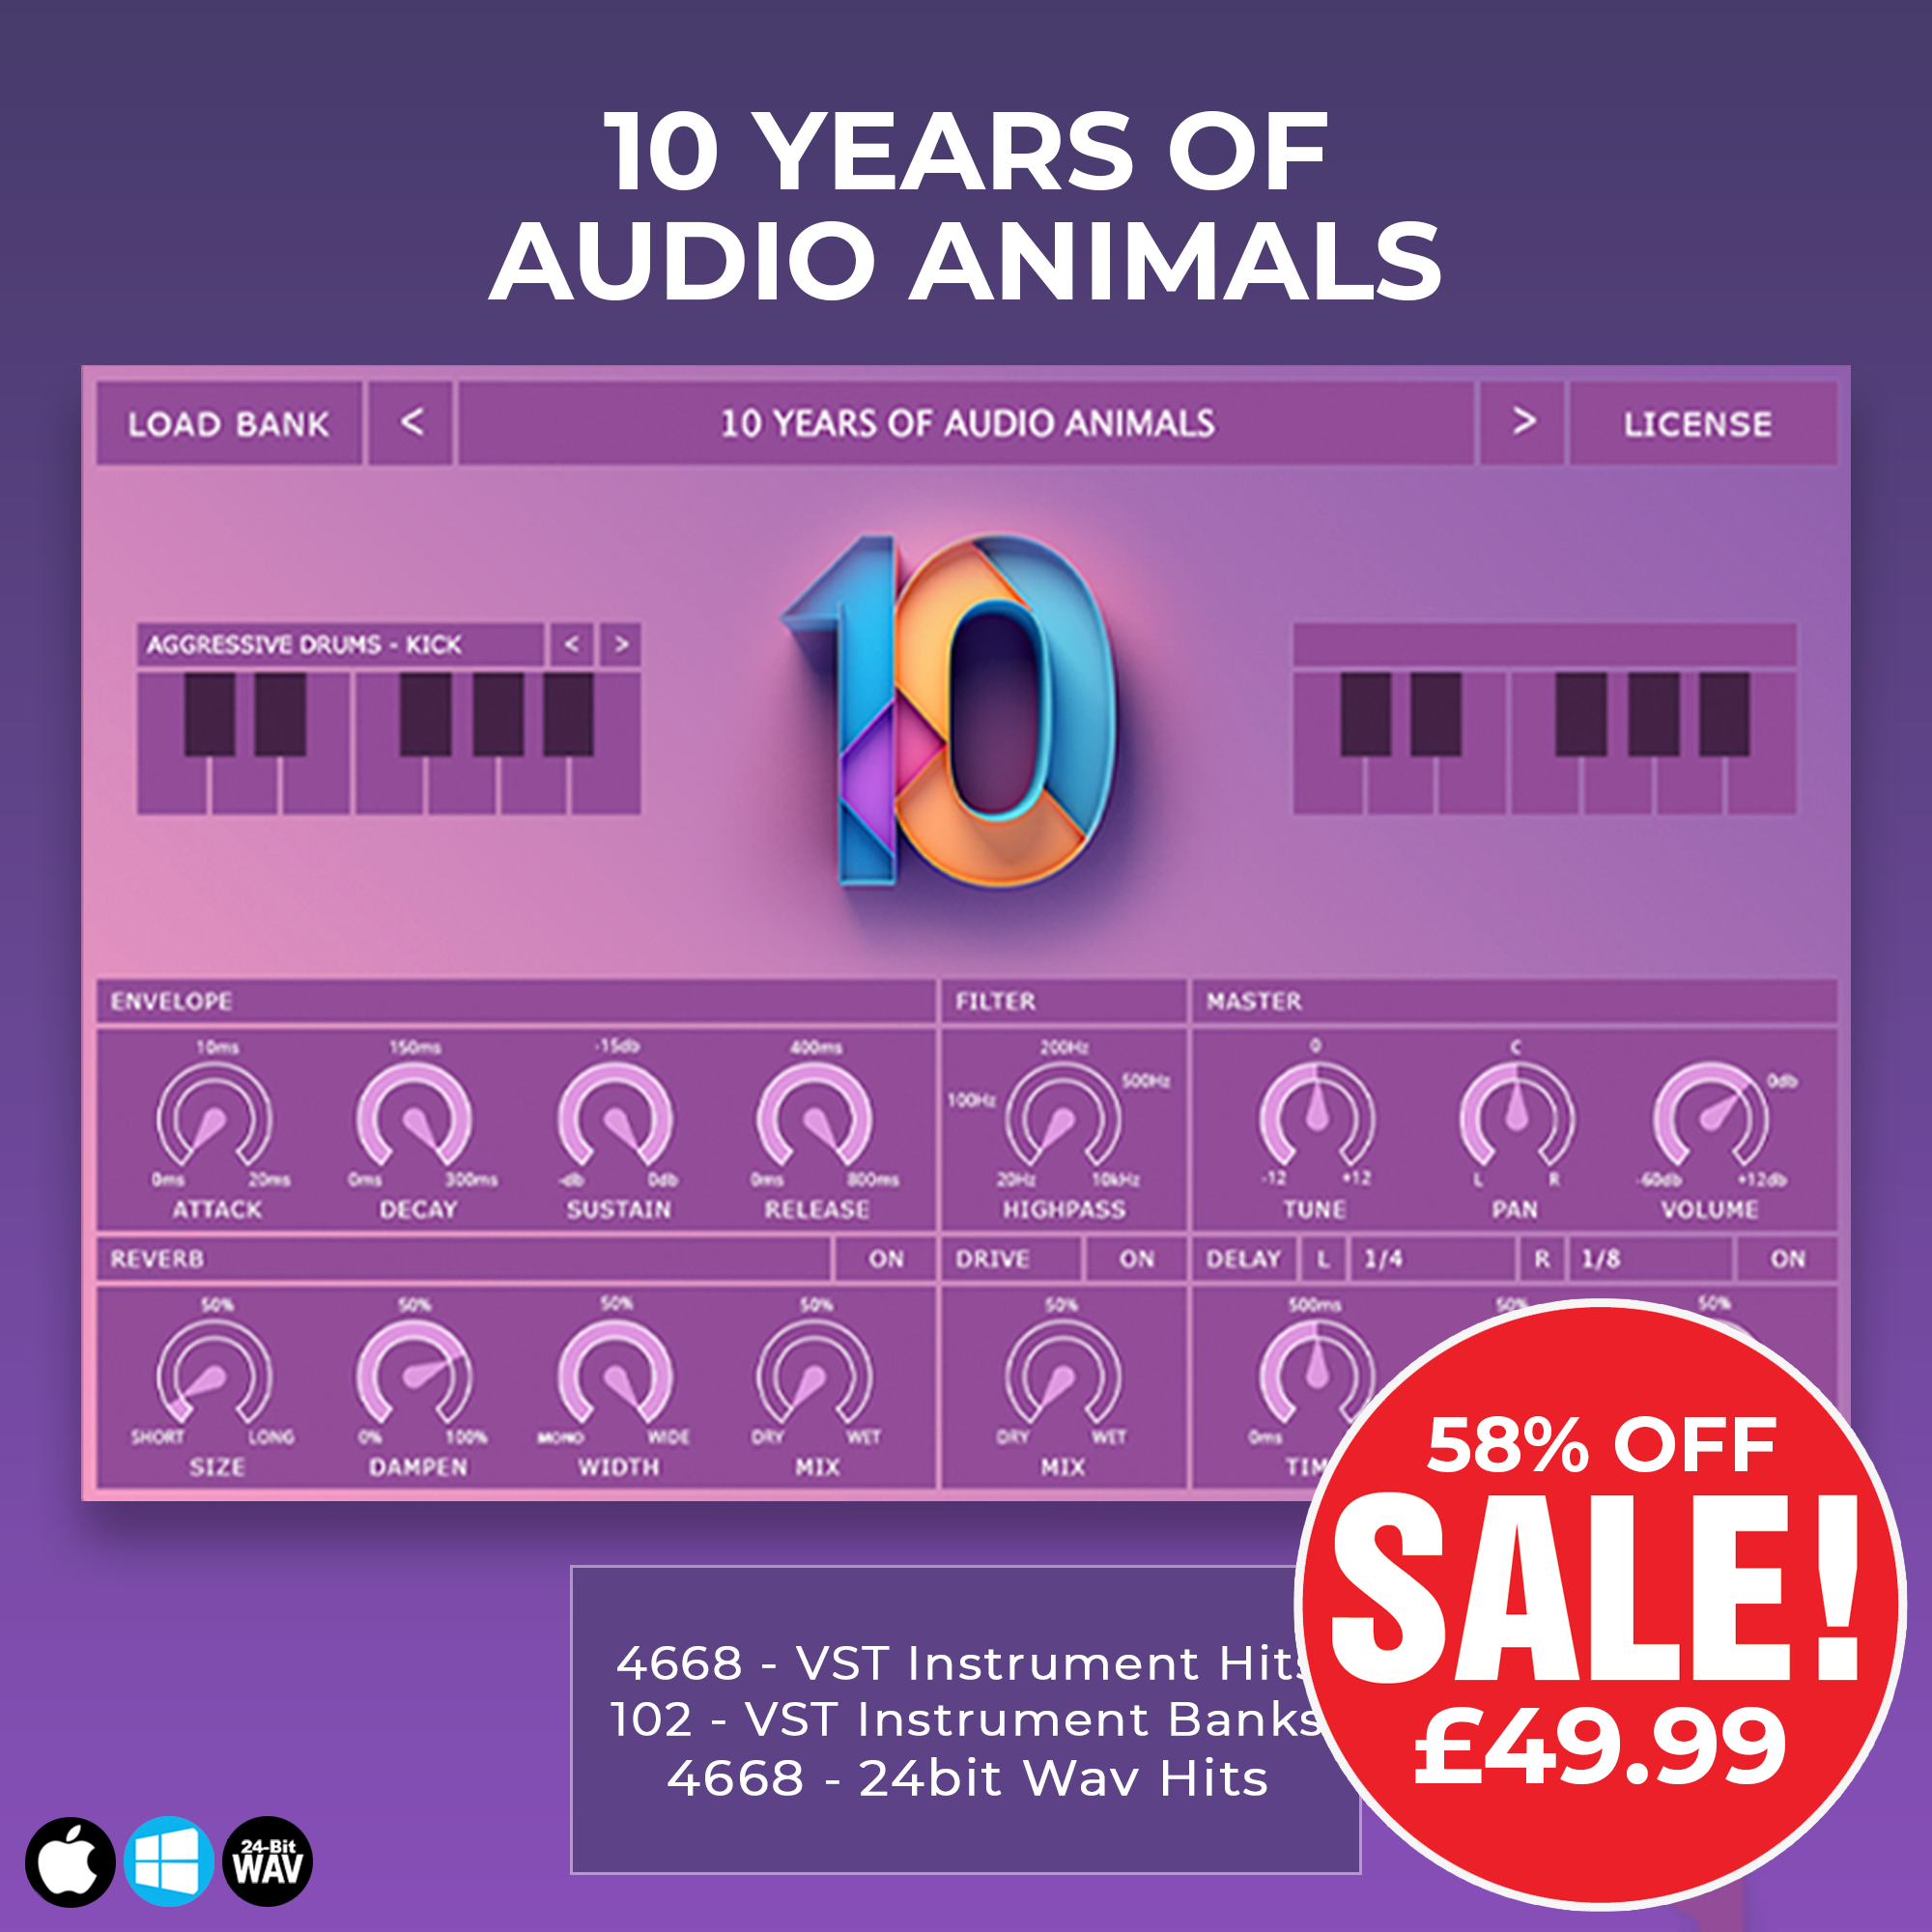 10-Years-Of-Audio-Animals-Main-Product-Image-58off